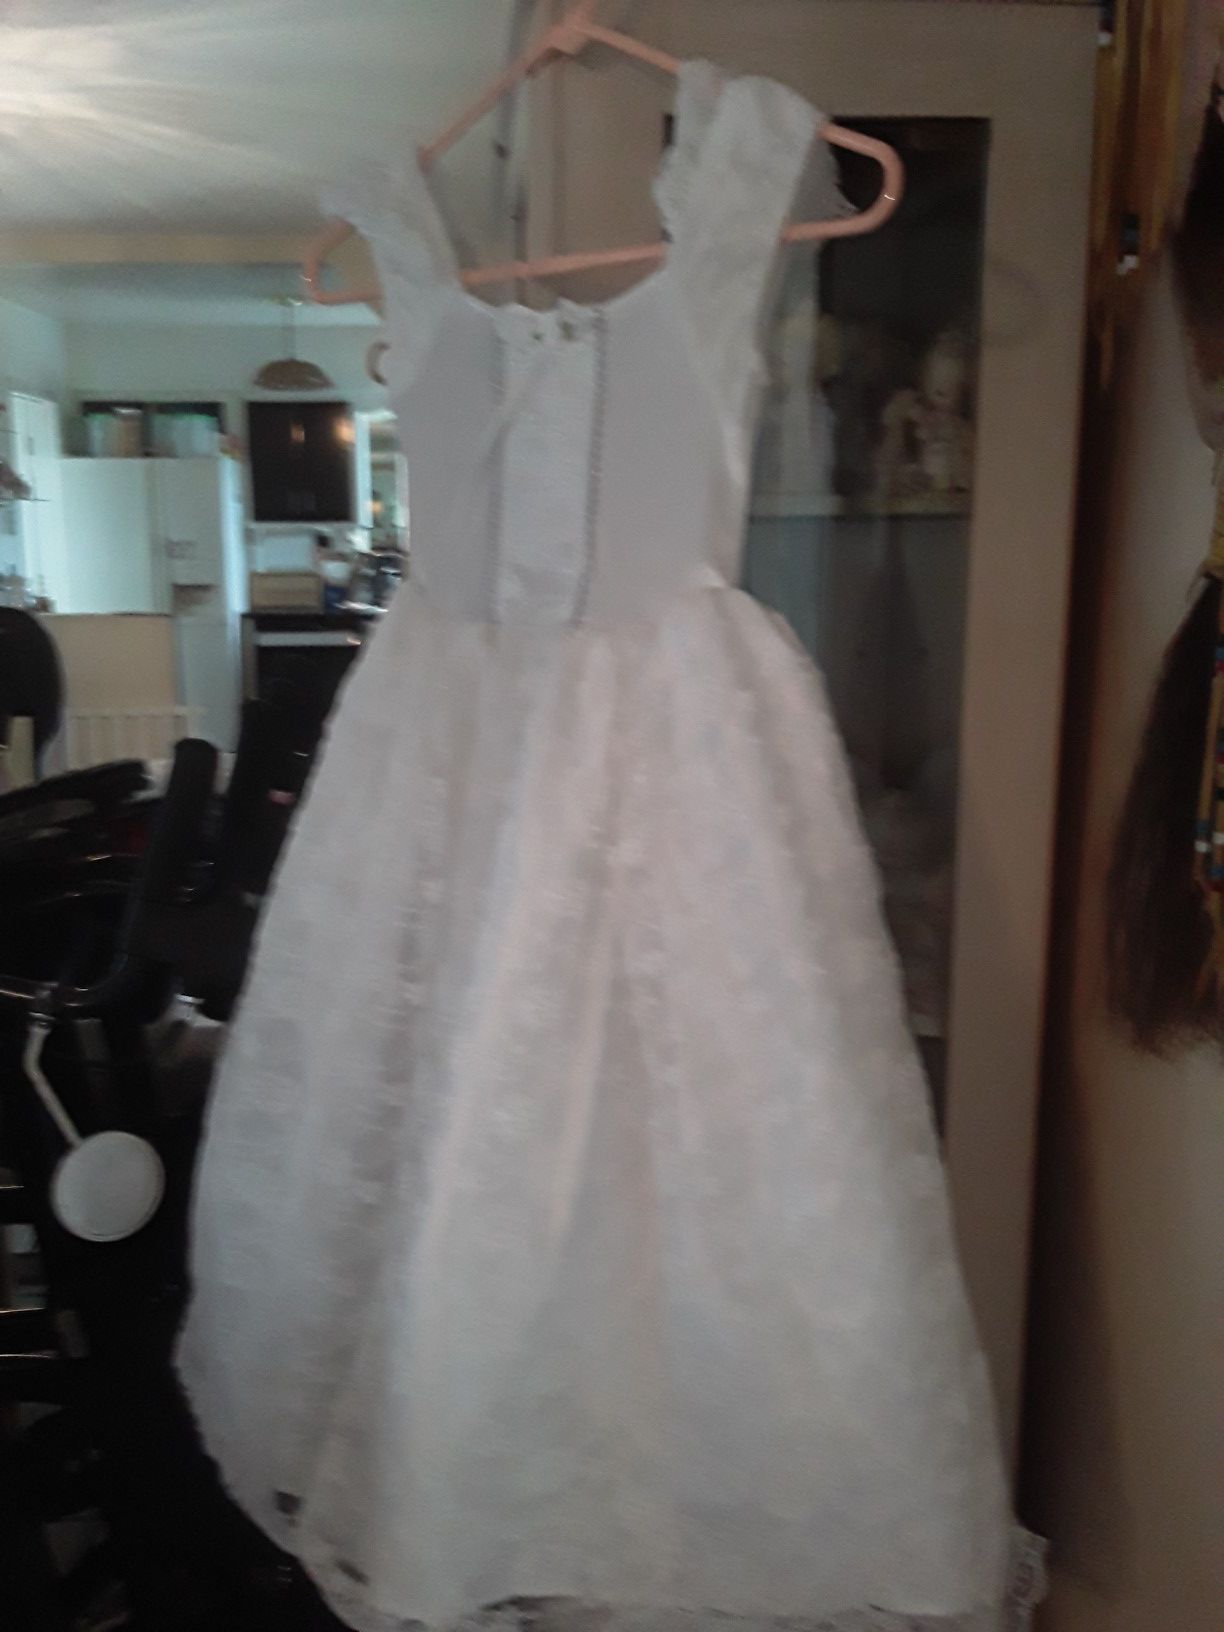 Beautiful white Communion flower girl formal dress floral design layered girls size 4 $15 cheap price! Need gone asap